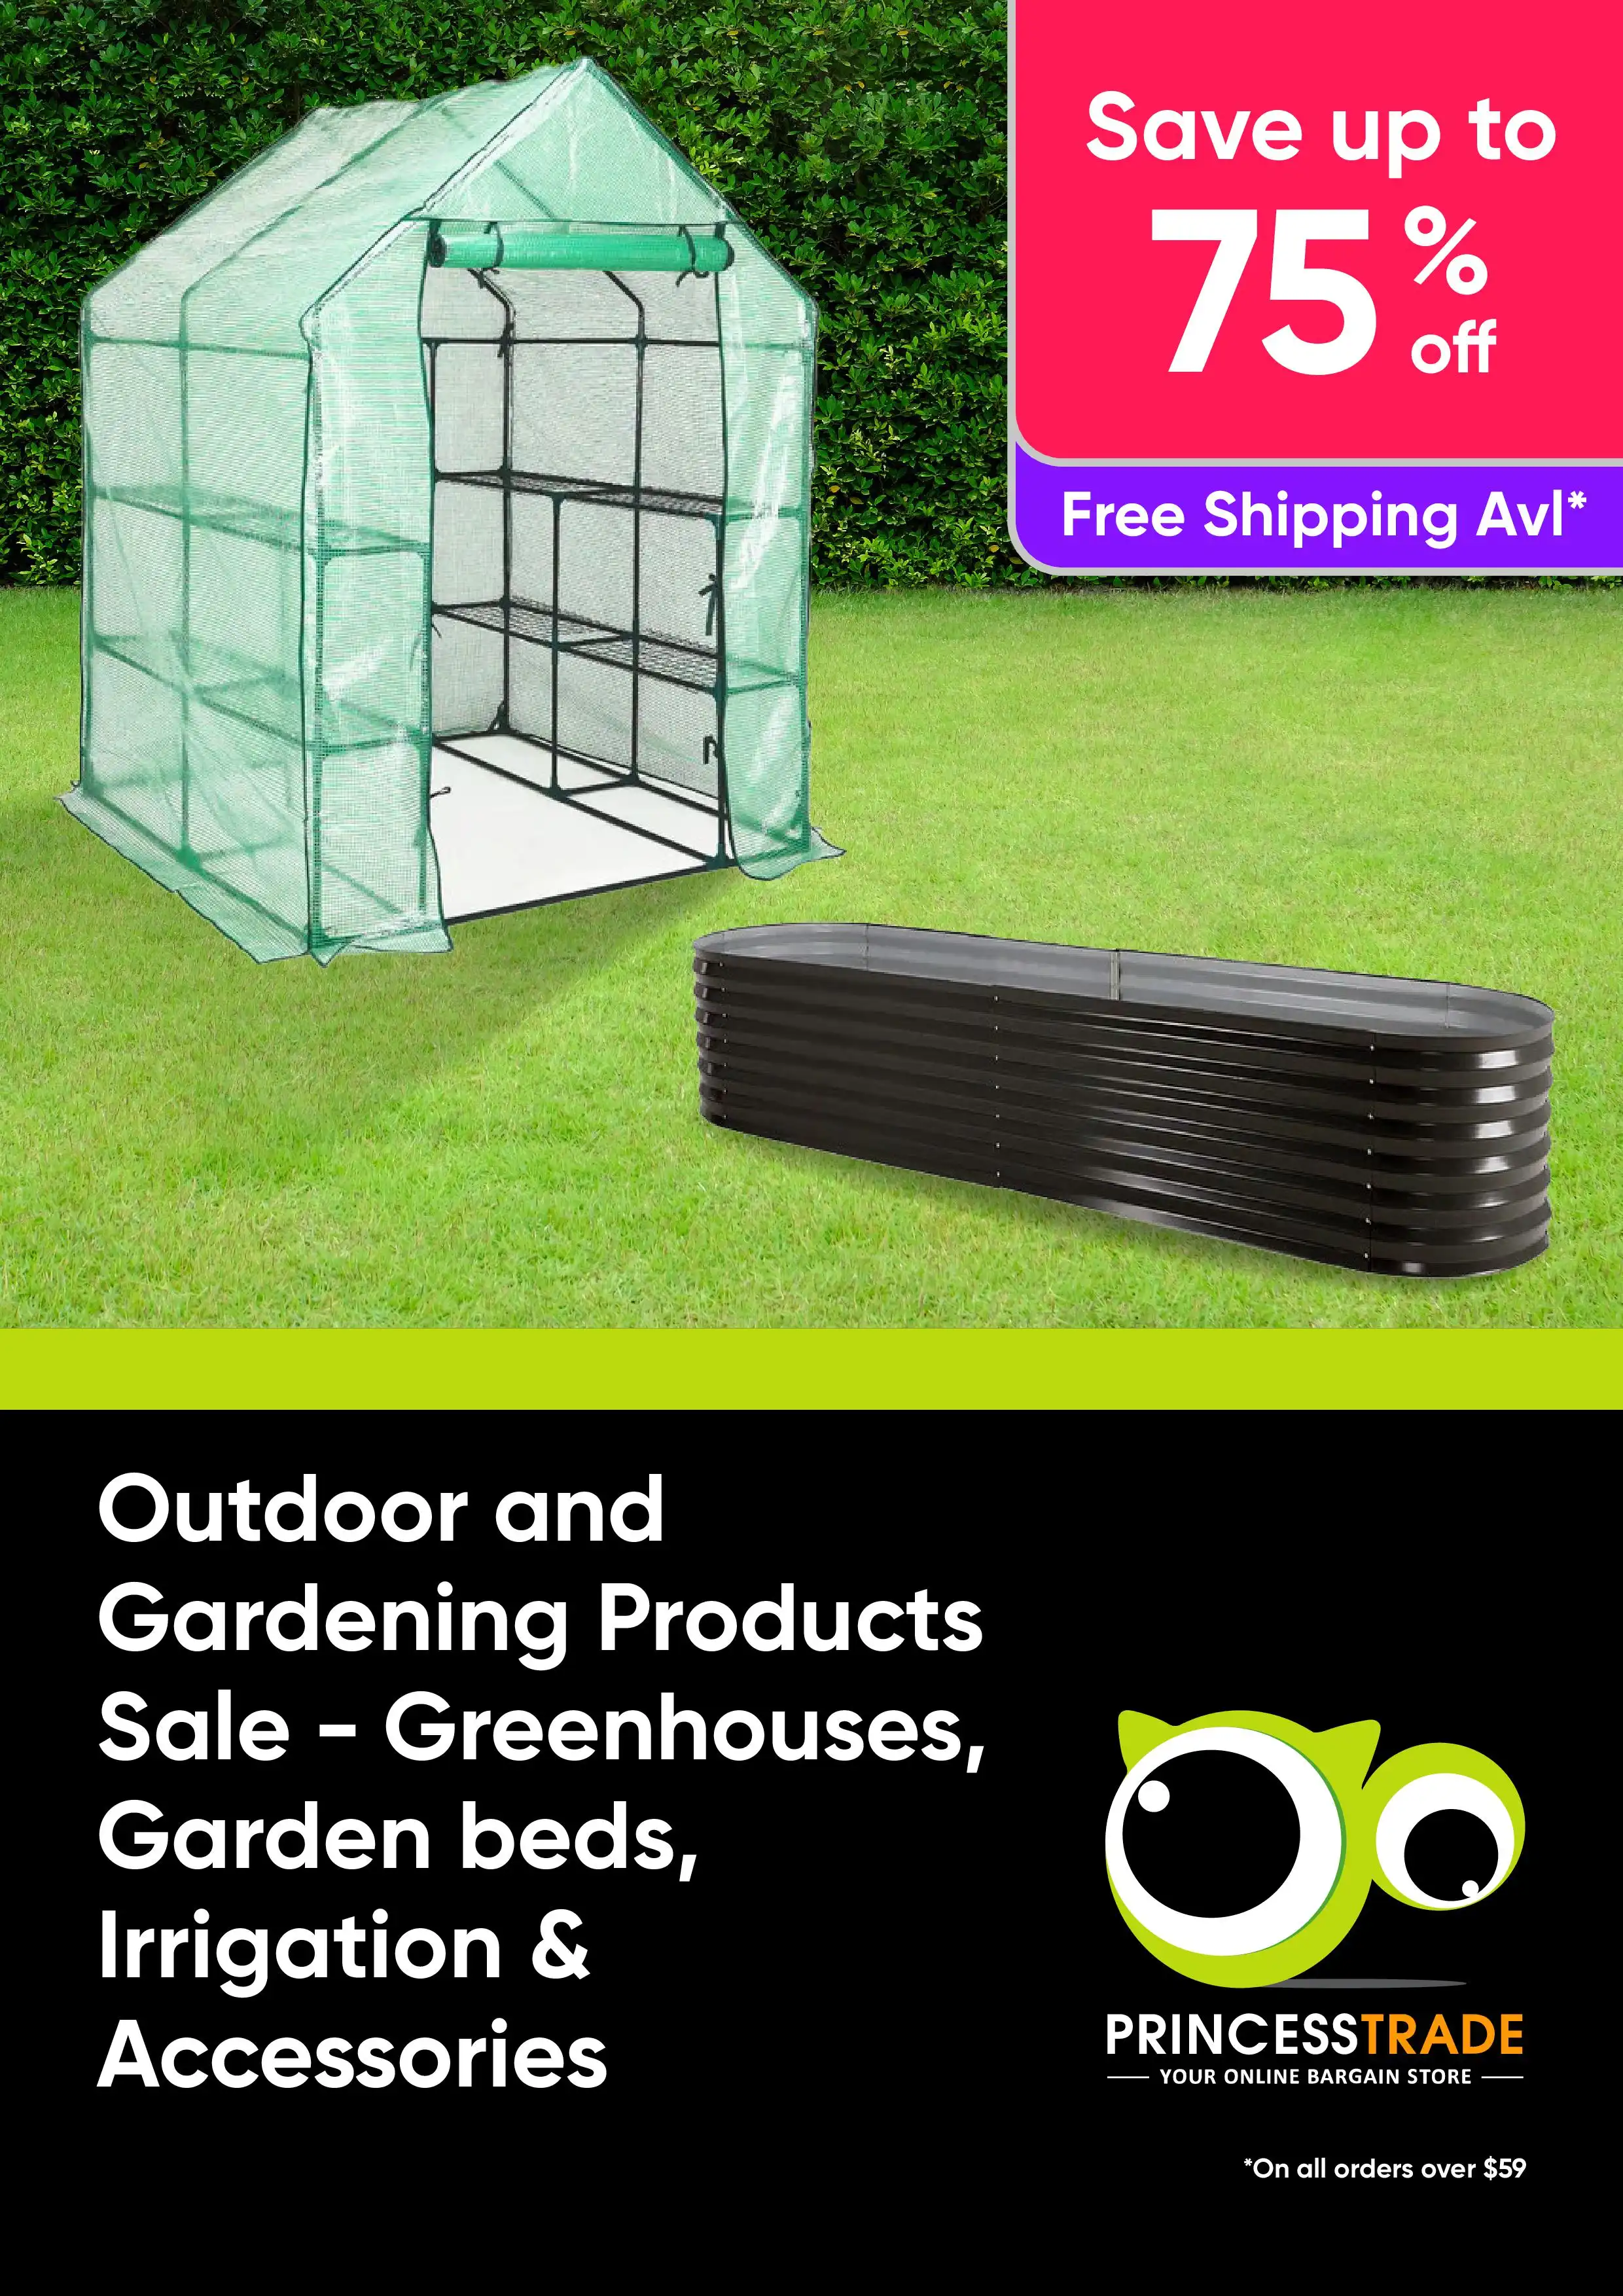 Save Up To 75% Off Outdoor and Gardening Products - Shop Greenhouses, Irrigation & Accessories